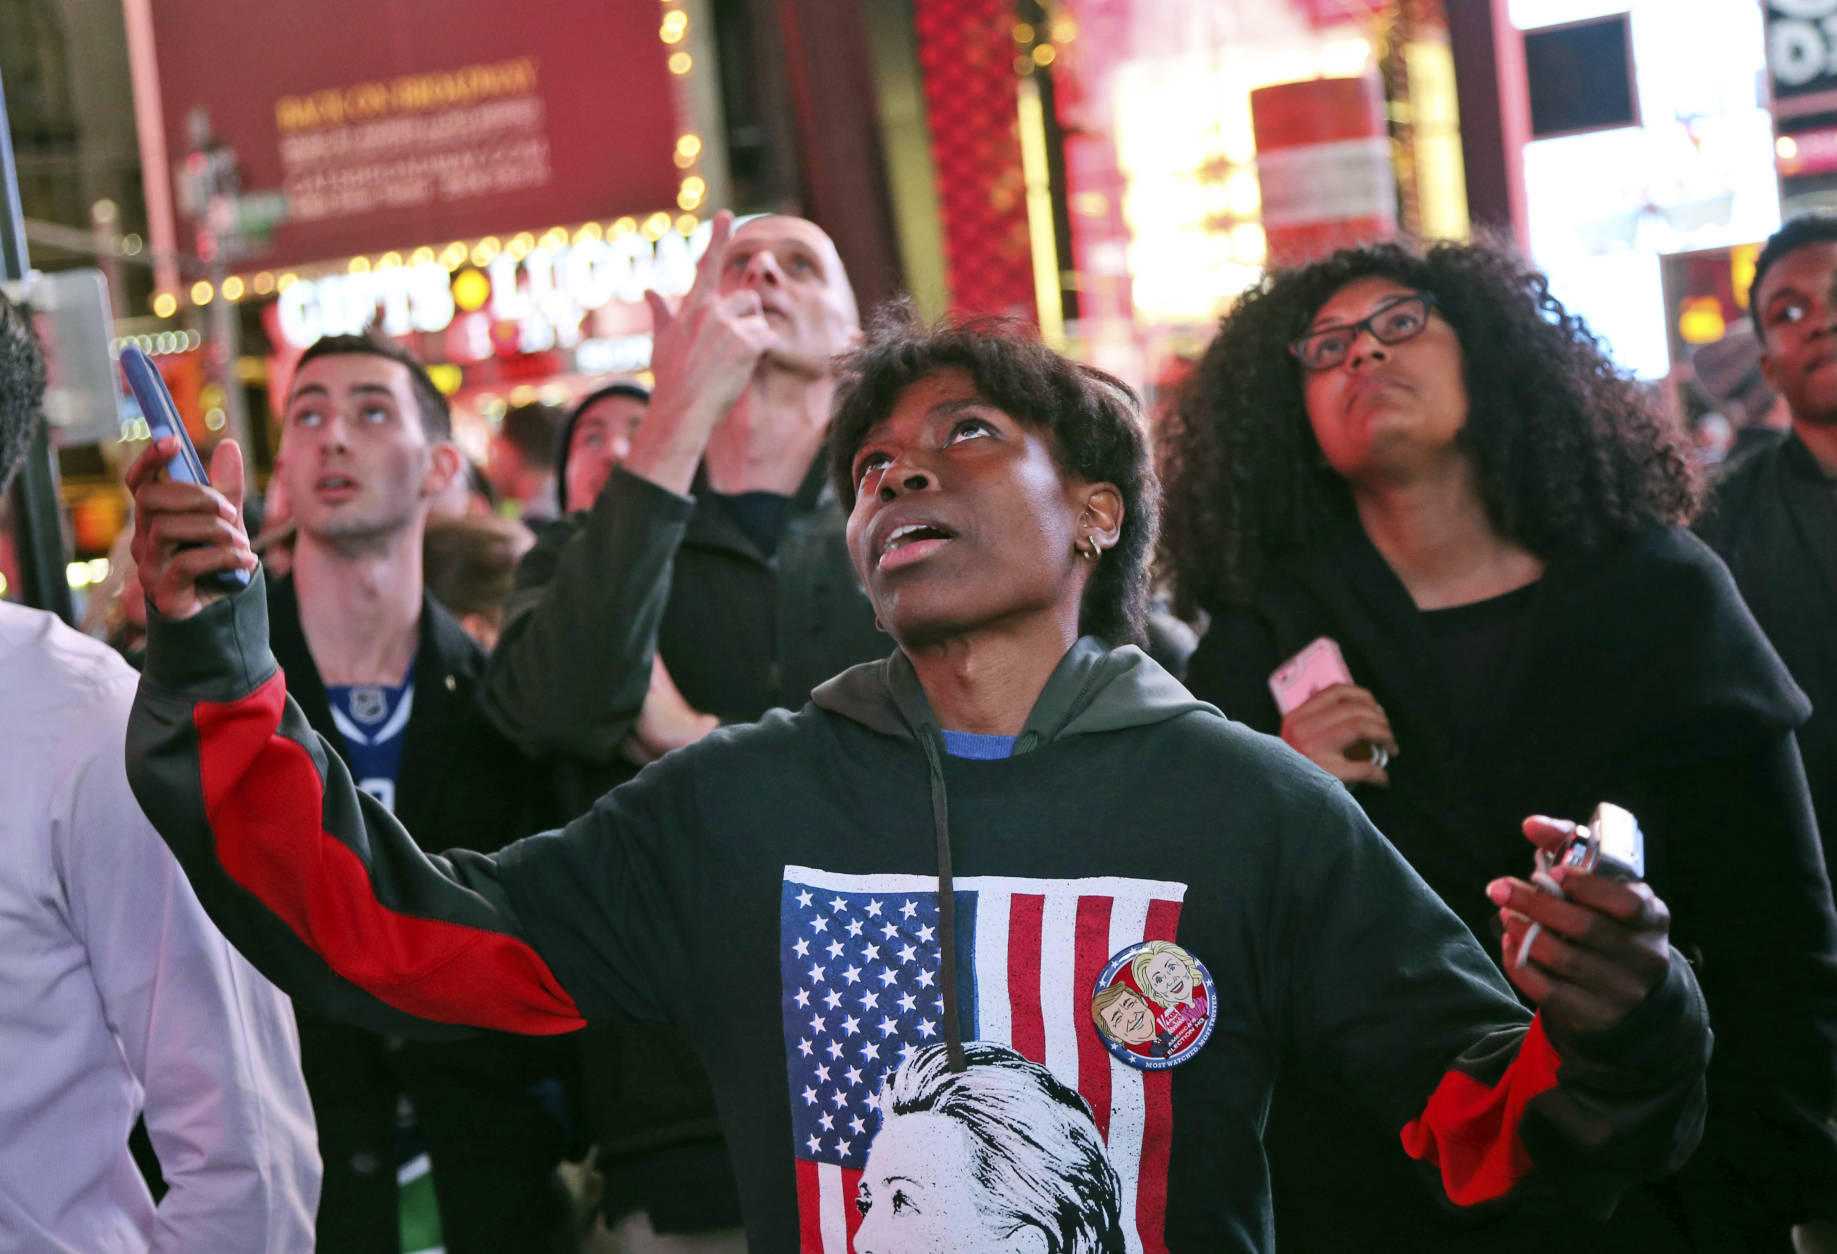 Kara Williams reacts to the news that Republican presidential candidate Donald Trump was ahead of Democratic presidential candidate, Hillary Clinton, in Florida while watching election results in Times Square, New York, Tuesday, Nov. 8, 2016. (AP Photo/Seth Wenig)